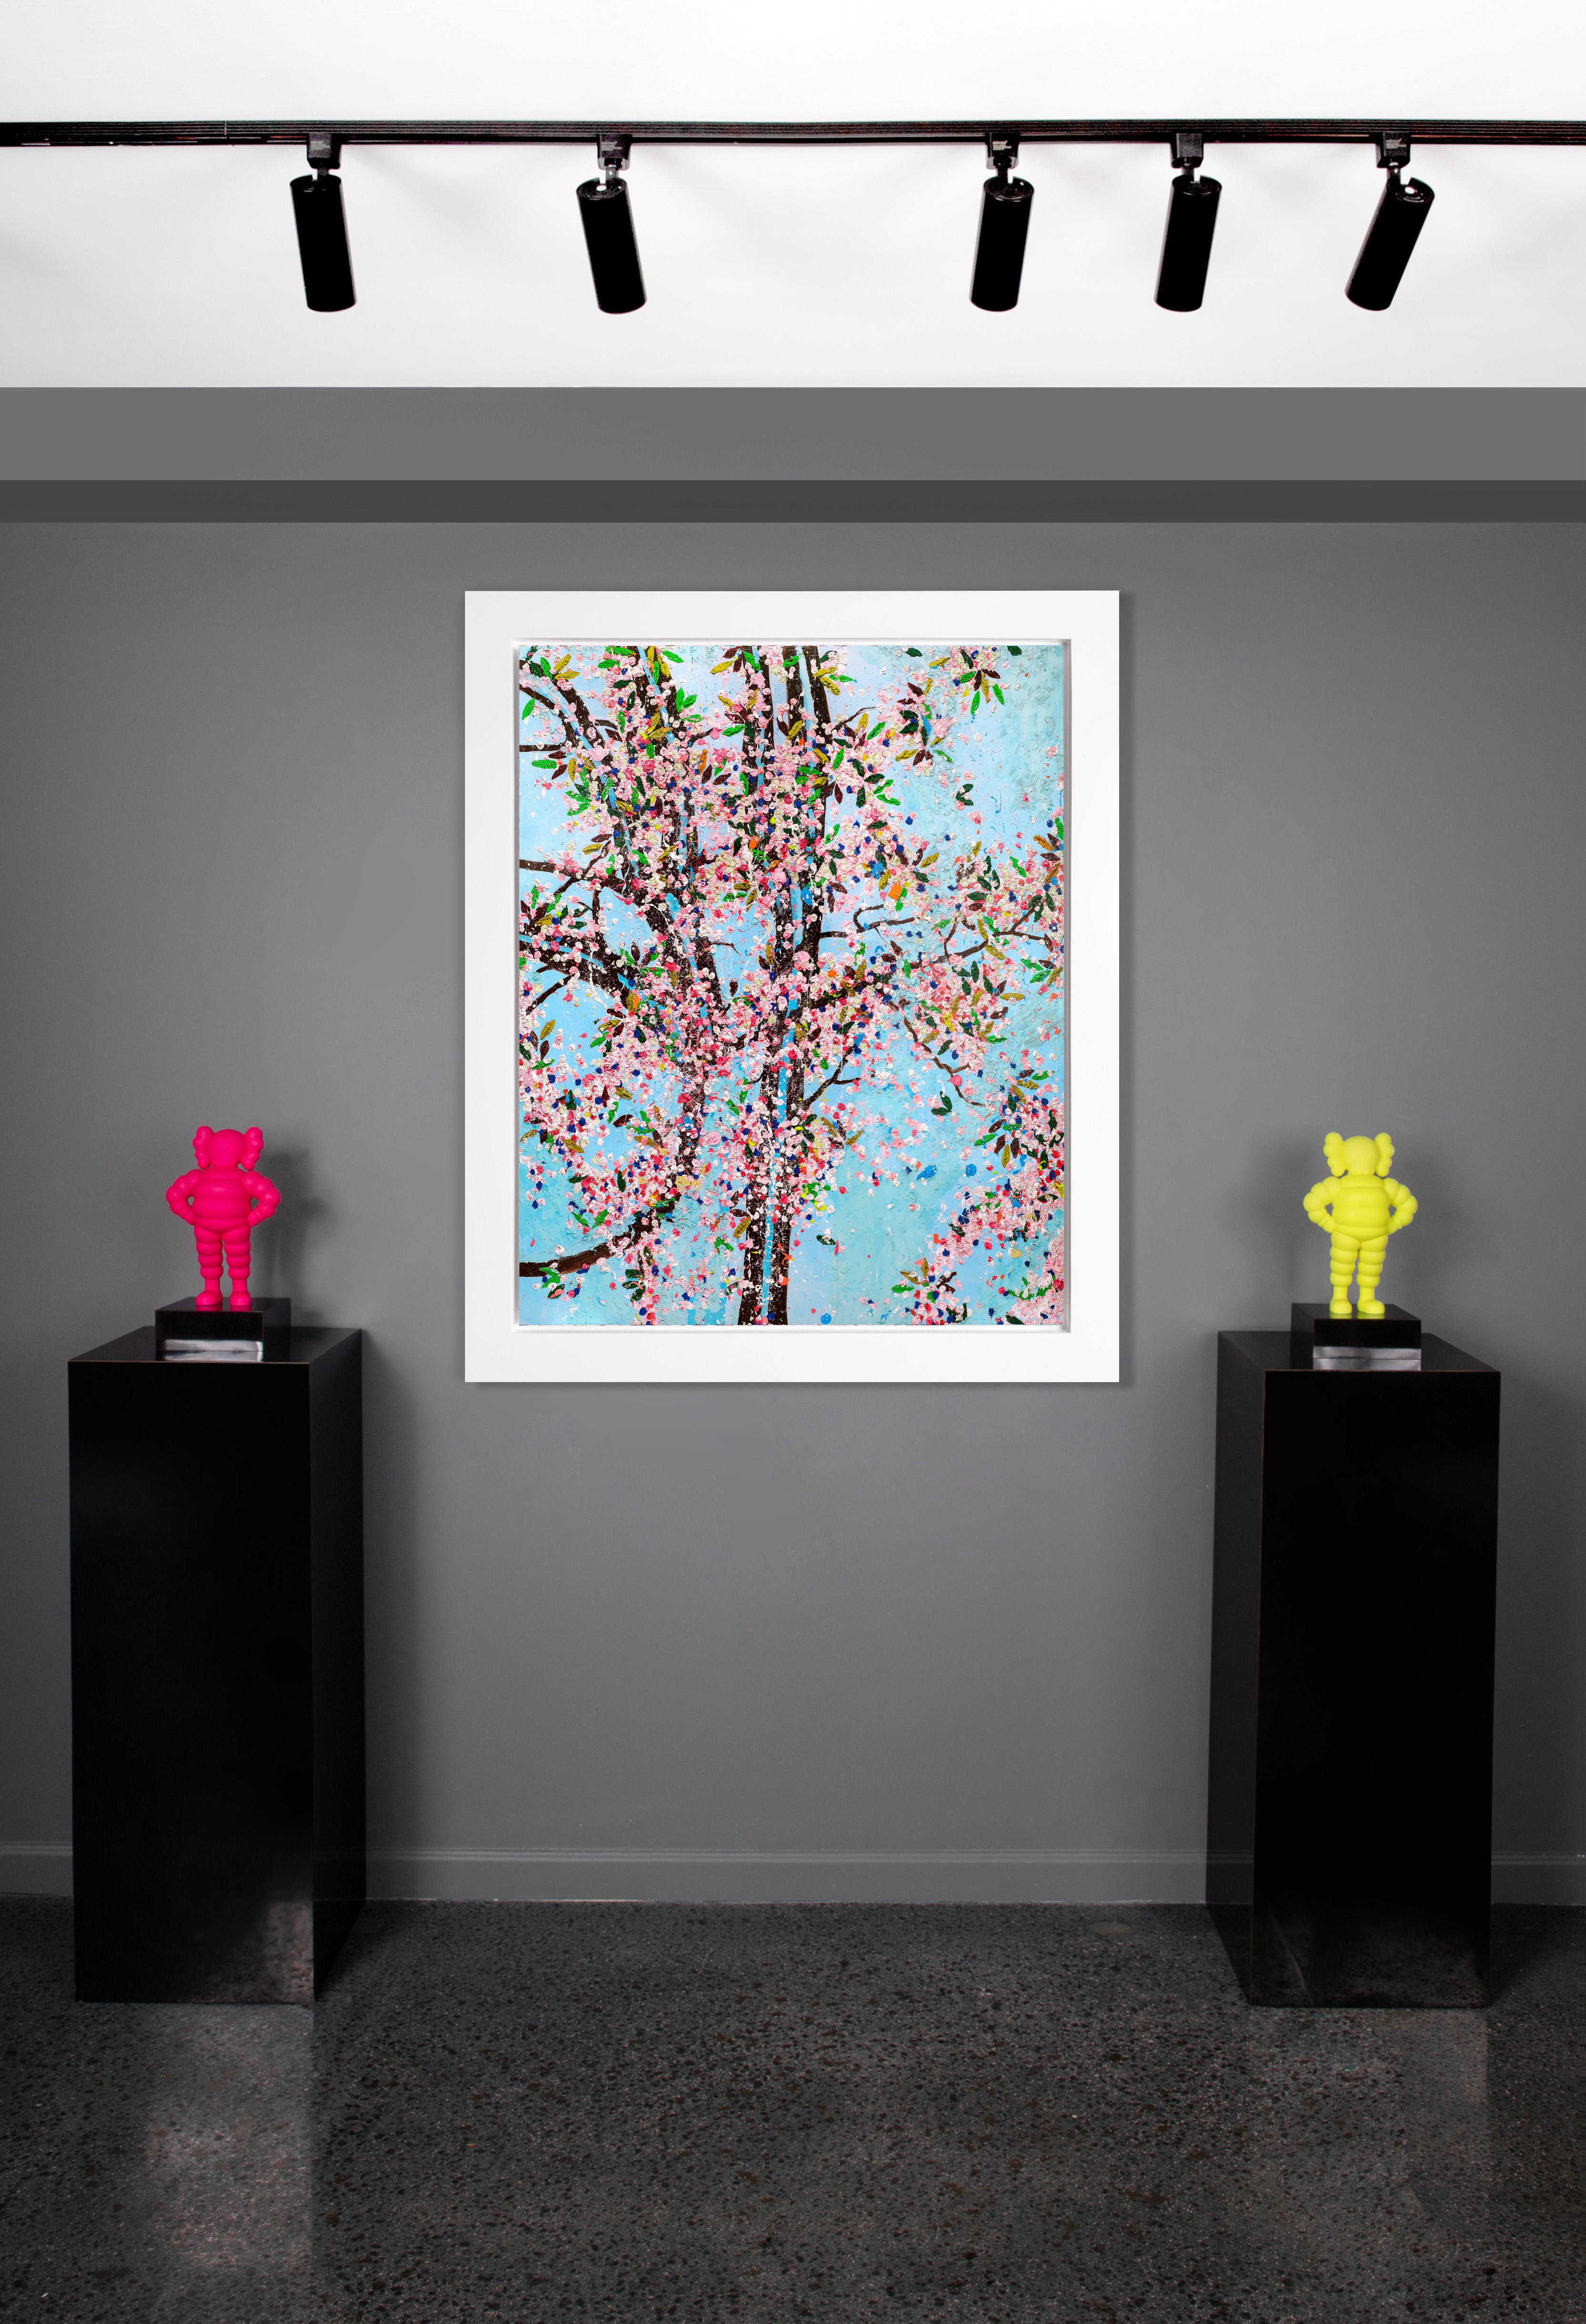 The contemporary pop art cherry blossom landscape ‘Courage' is one of the eight from the iconic ‘Virtues’ series by Damien Hirst, the laminated giclée print on aluminum panel was created in 2021 as a reflection of his latest exploration as a master